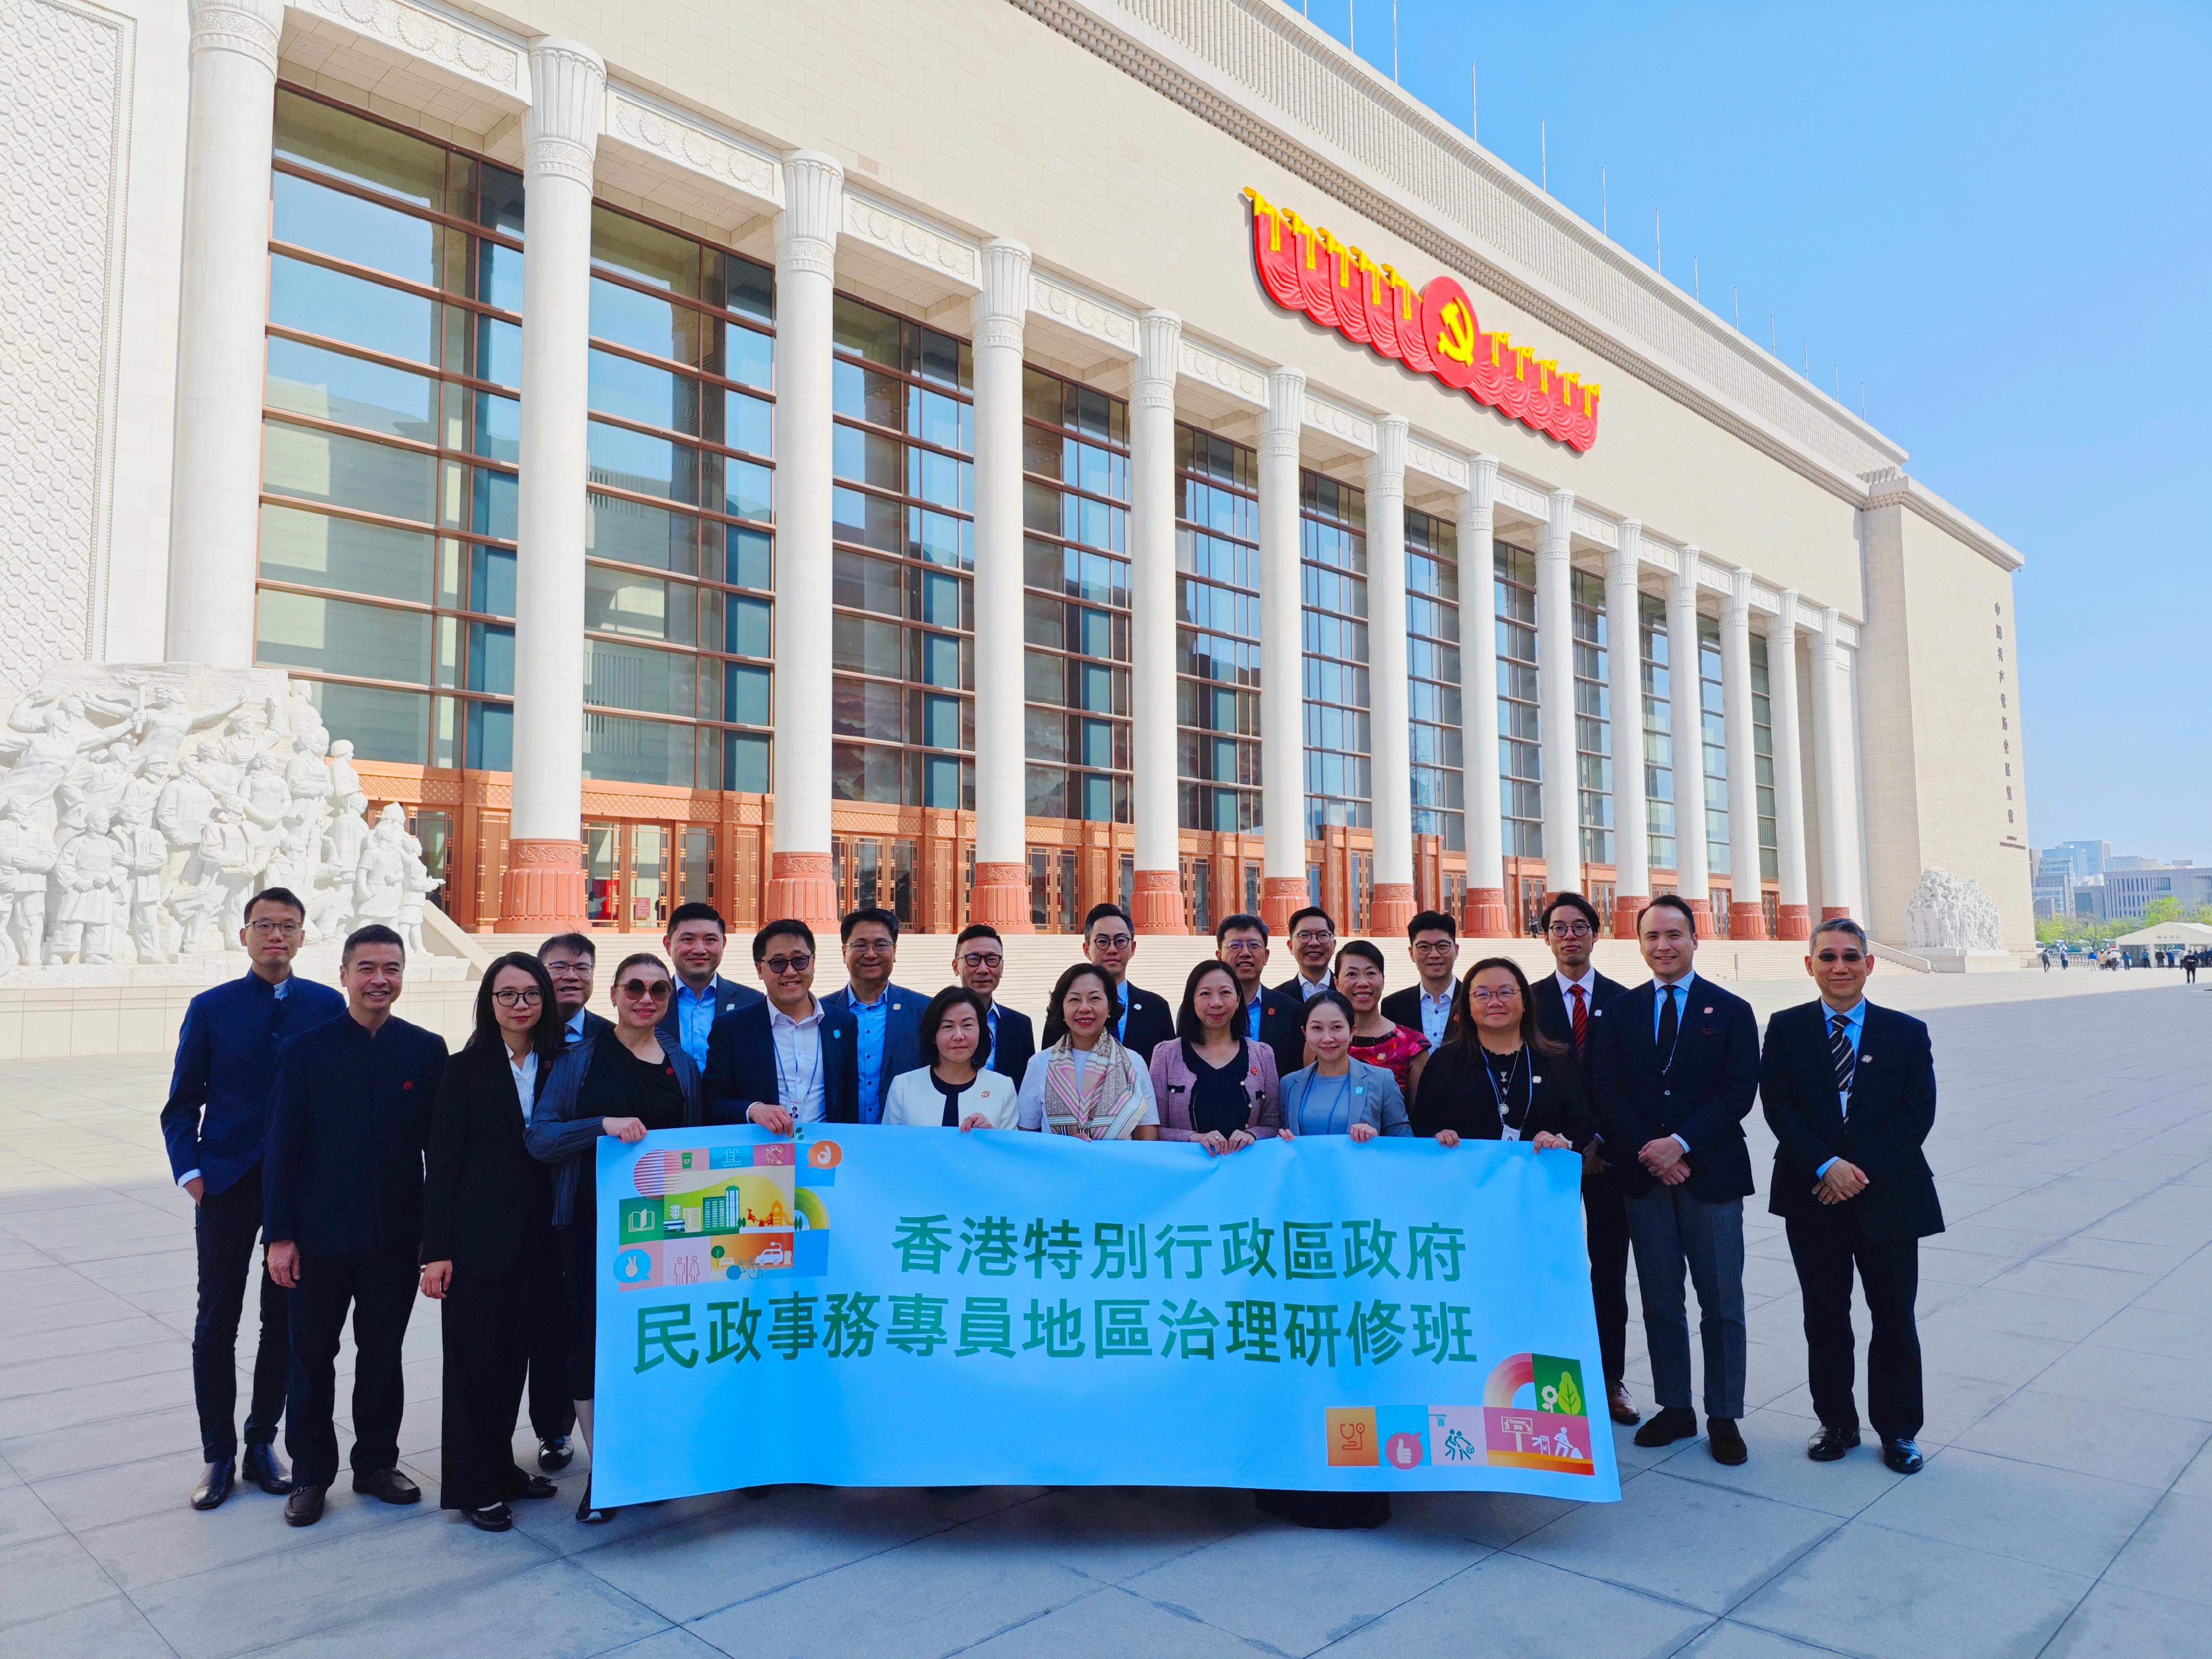 The delegation of the District Officers of the Hong Kong Special Administrative Region Government led by the Secretary for Home and Youth Affairs, Miss Alice Mak, continued its study programme in Beijing on district governance today (April 18). Photo shows Miss Mak (front row, fourth right) and the delegation visiting the Museum of the Communist Party of China to obtain a deeper understanding of the 100-year history of the Communist Party of China.